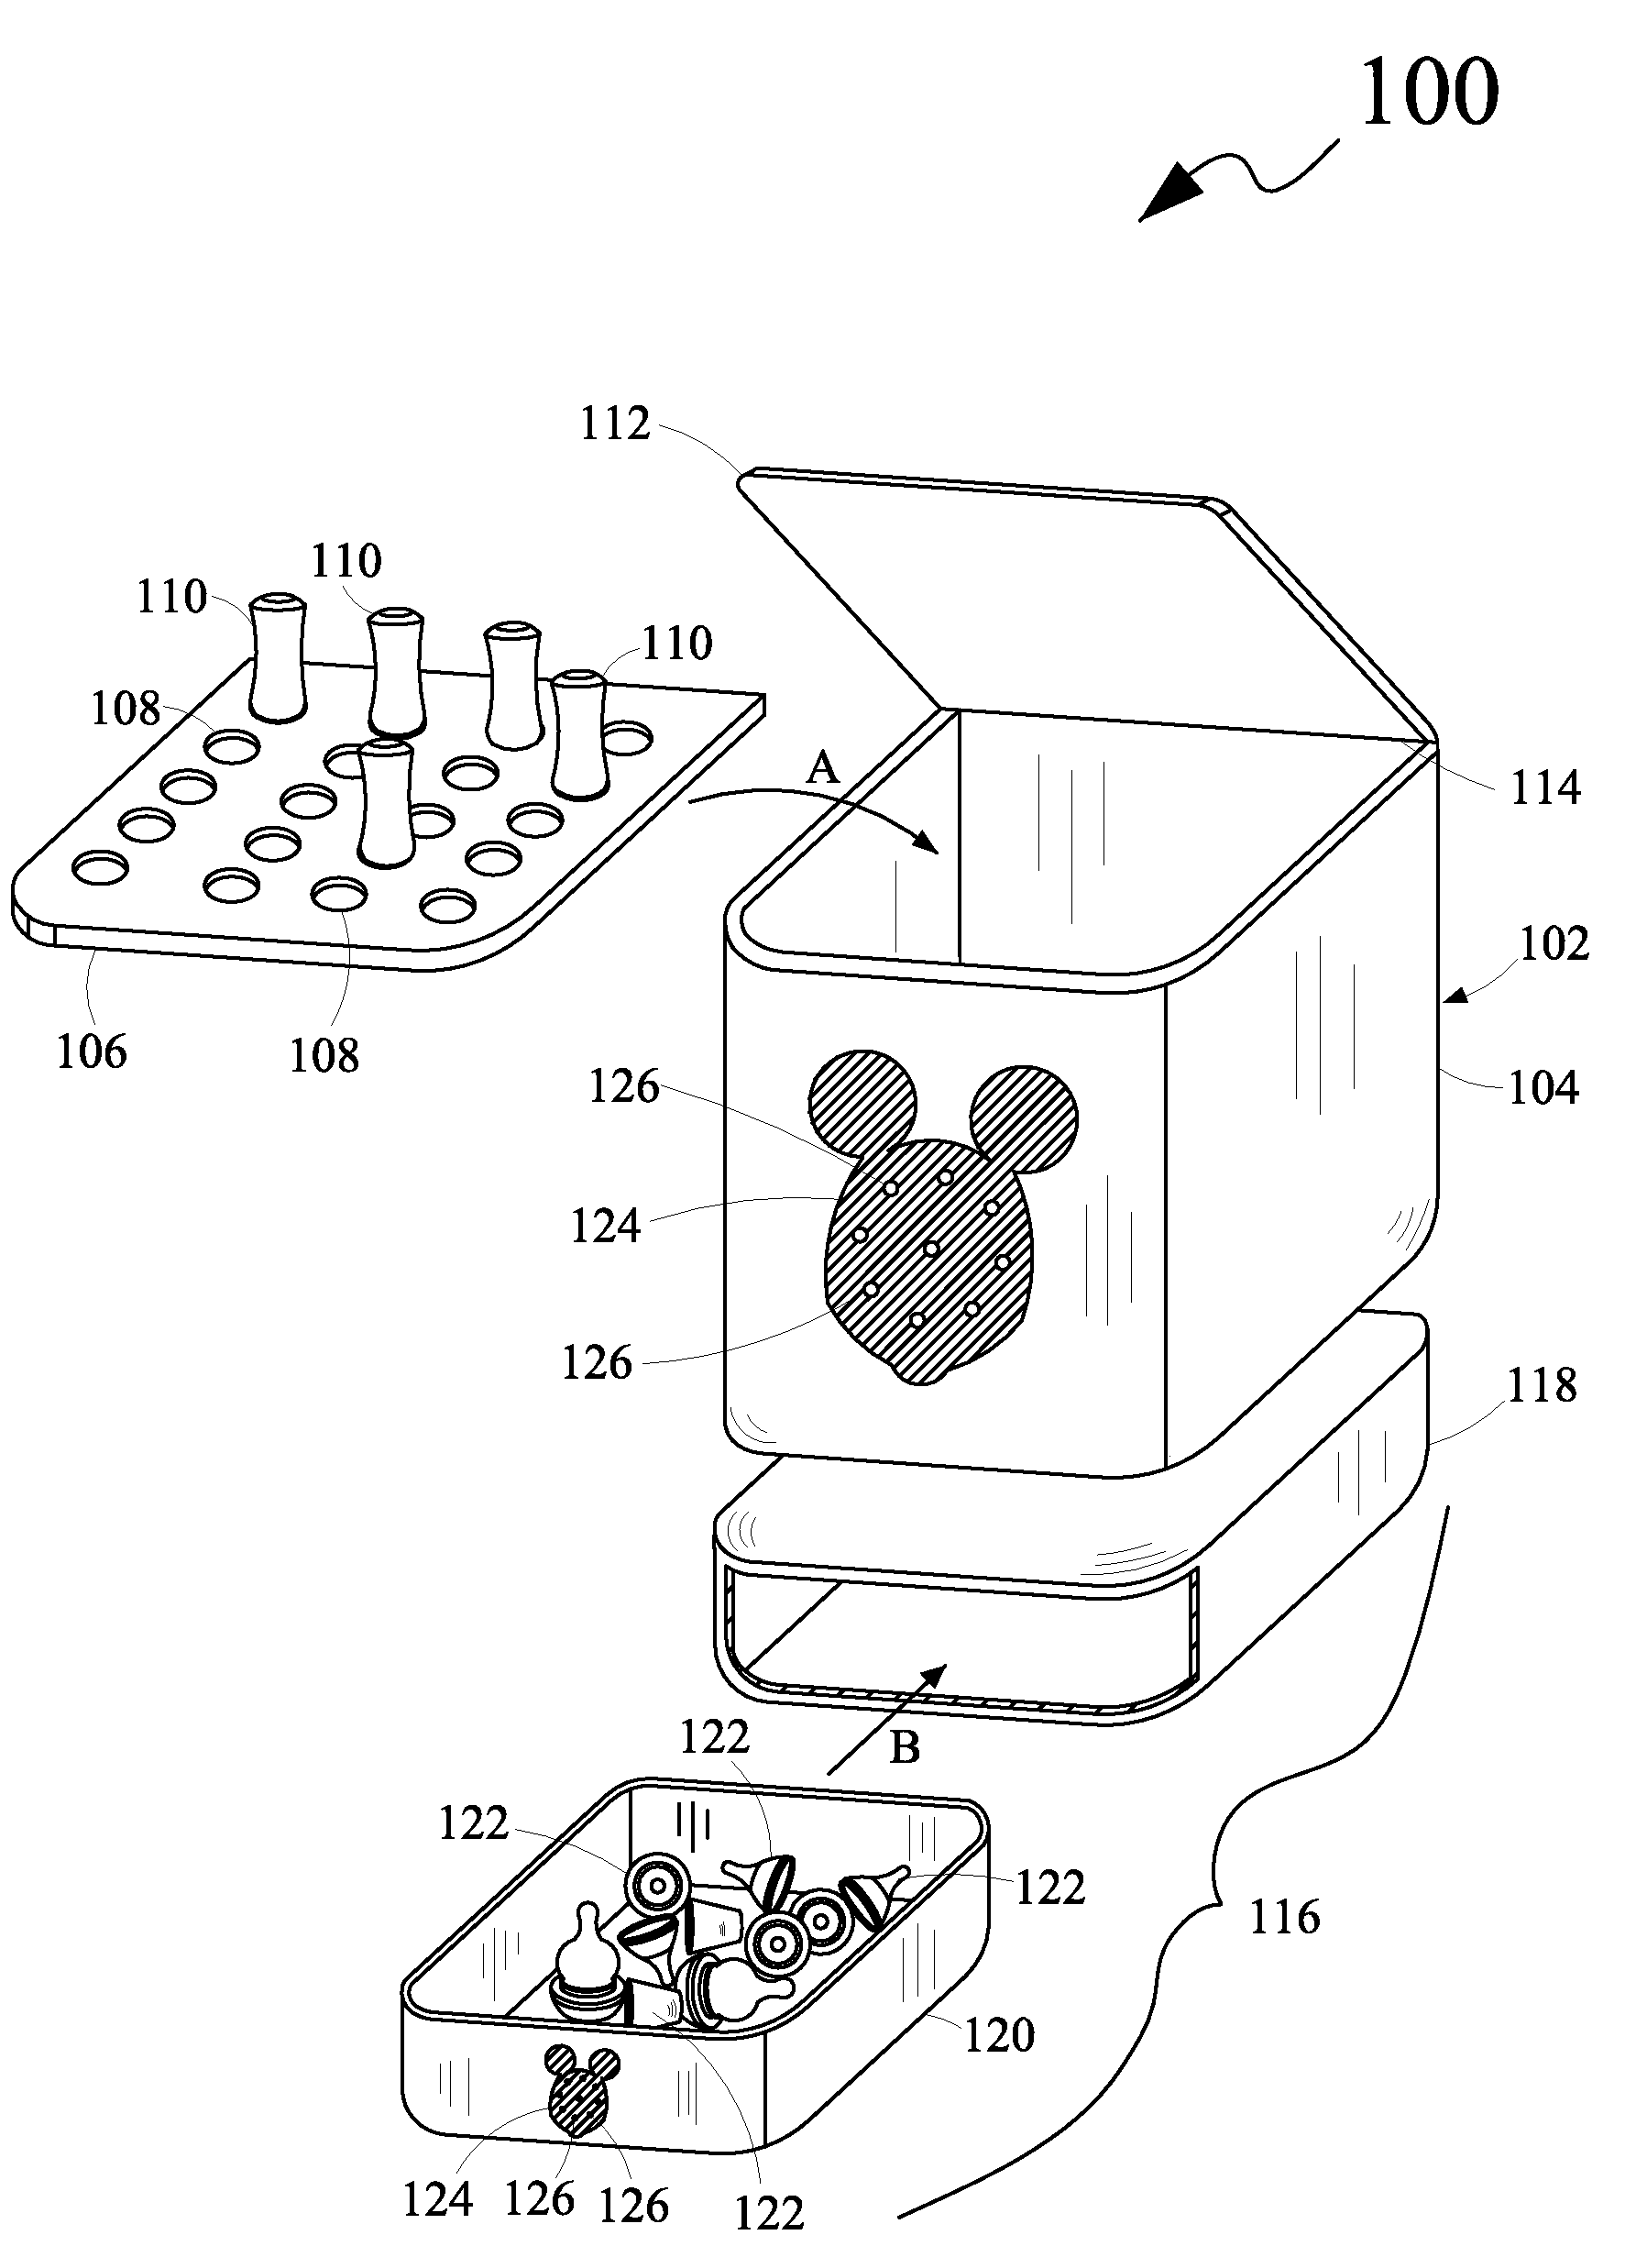 Apparatus for storing baby bottles